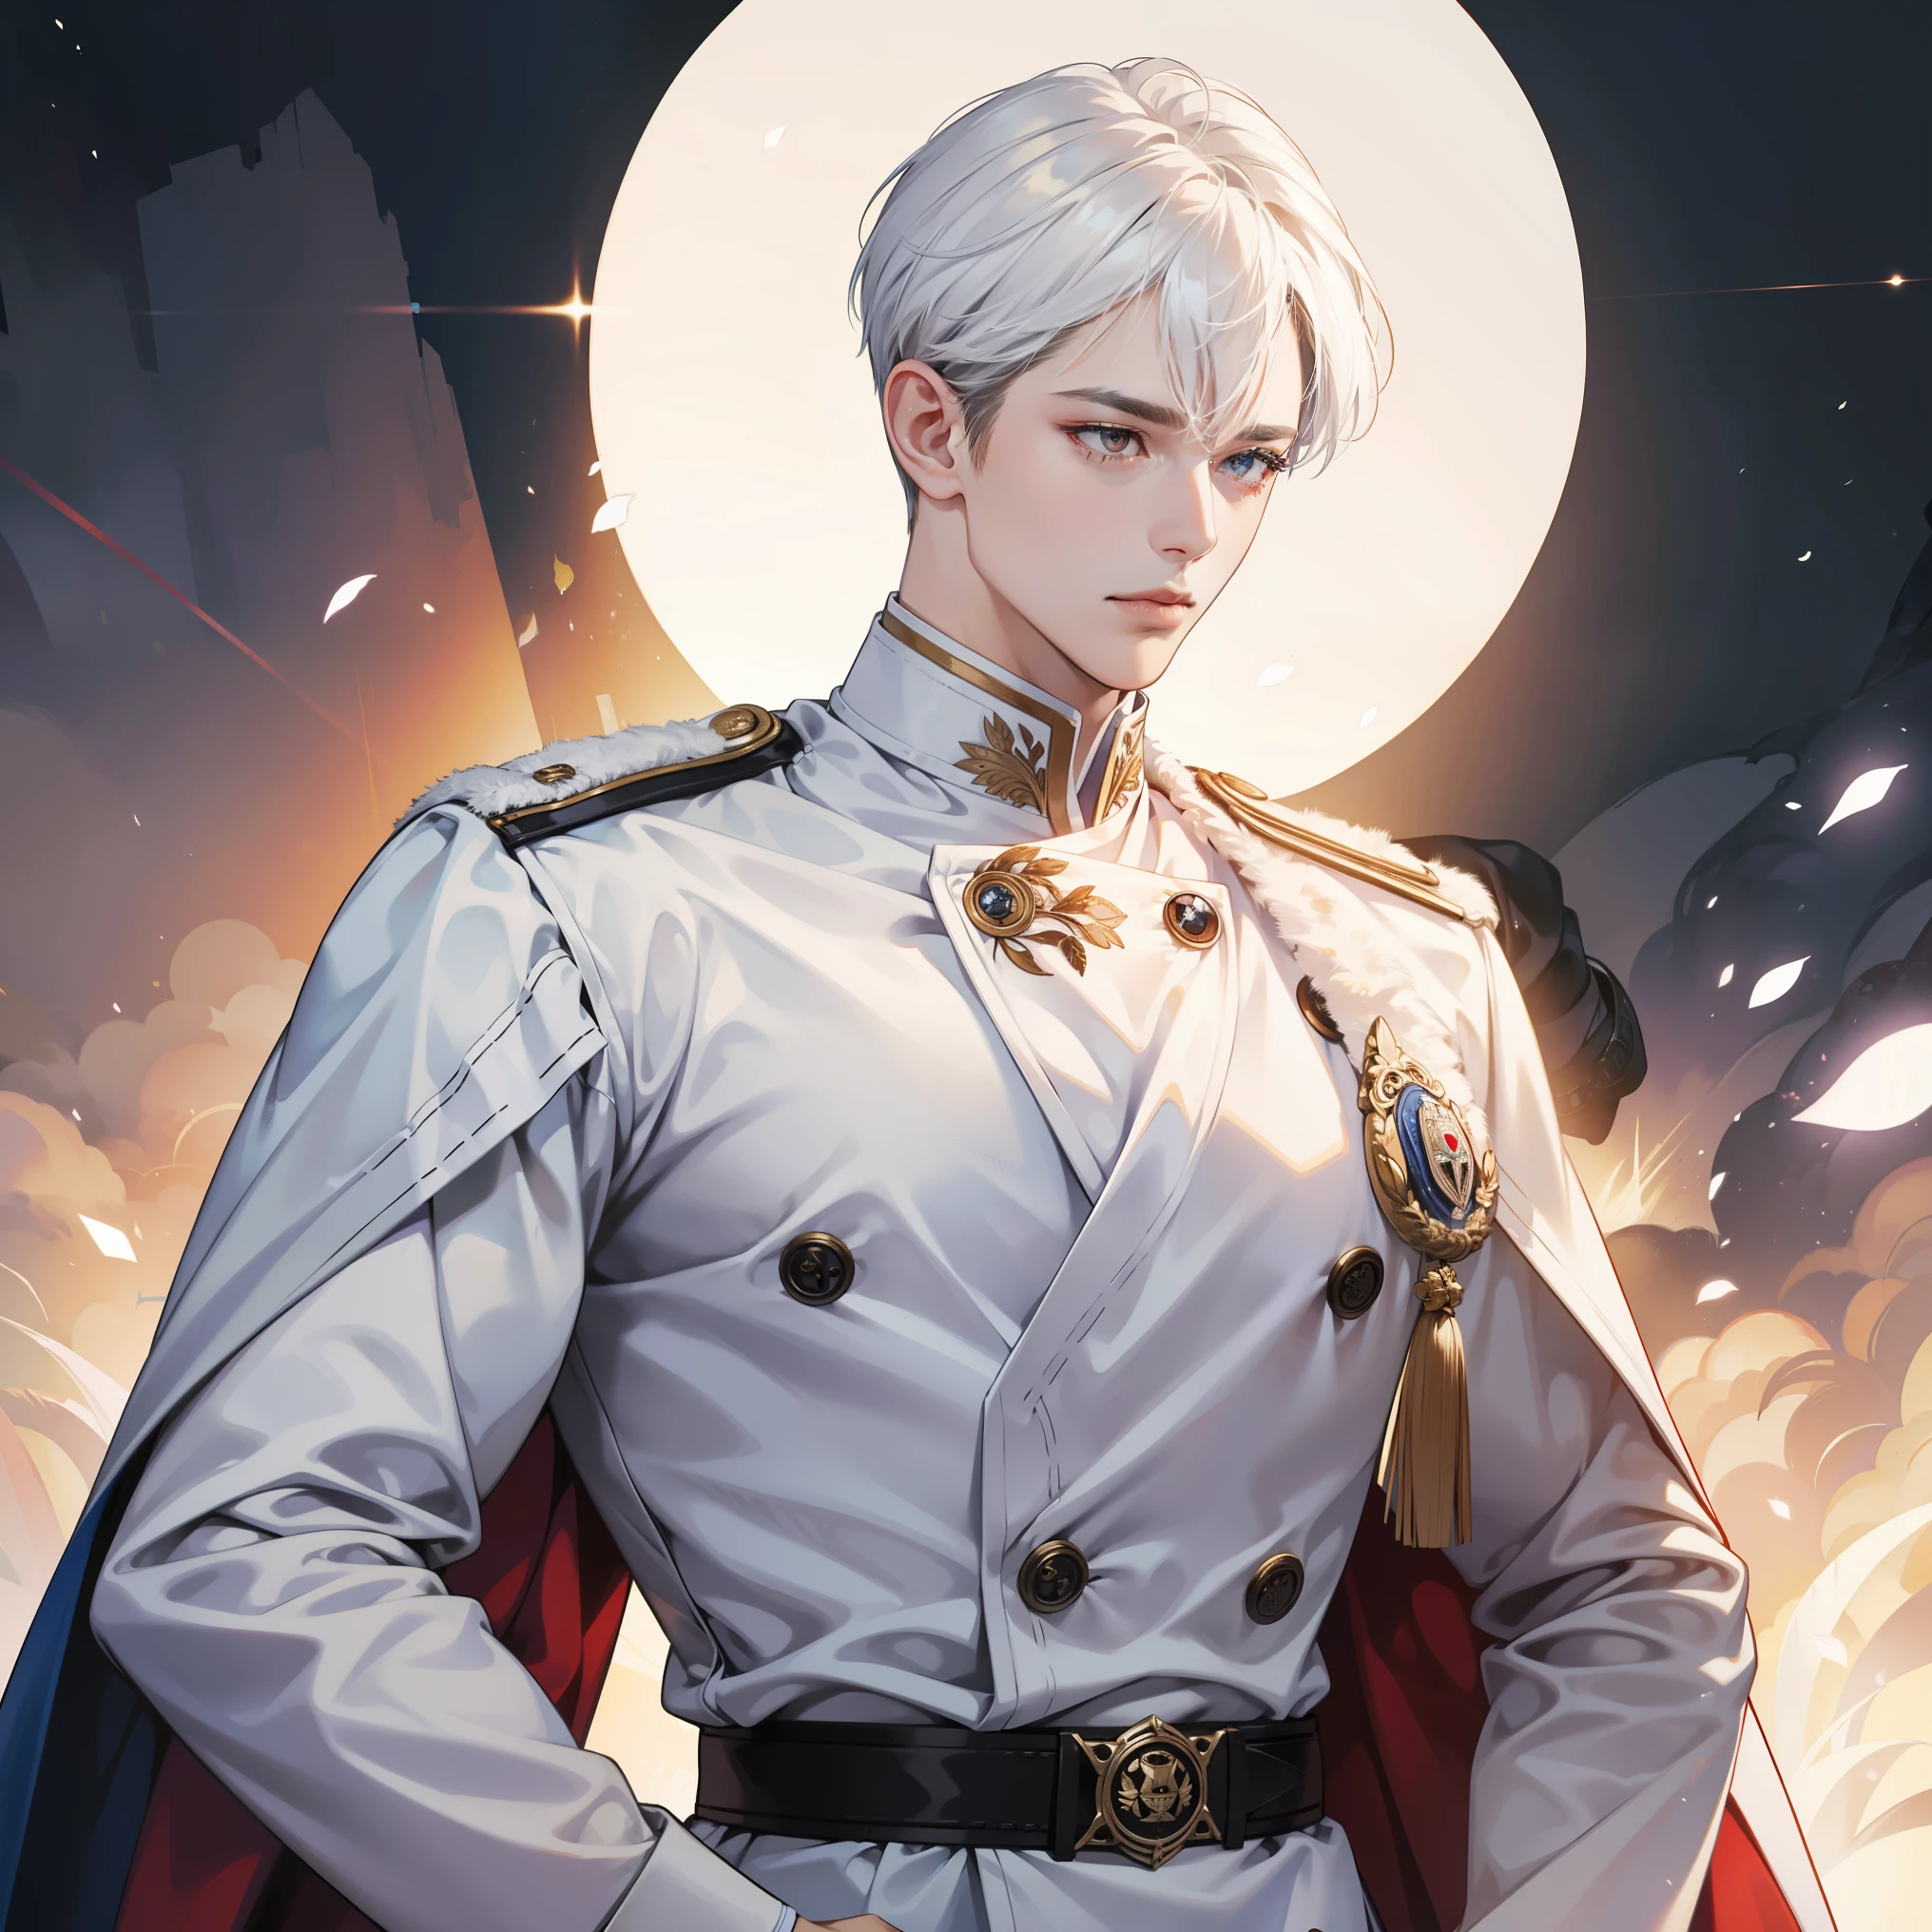 Masterpiece, high quality, best quality, HD, realistic, perfect lighting, detailed body, 1 man, white eyes, uppercut hair, white Hair, King White Uniform, Palace background.